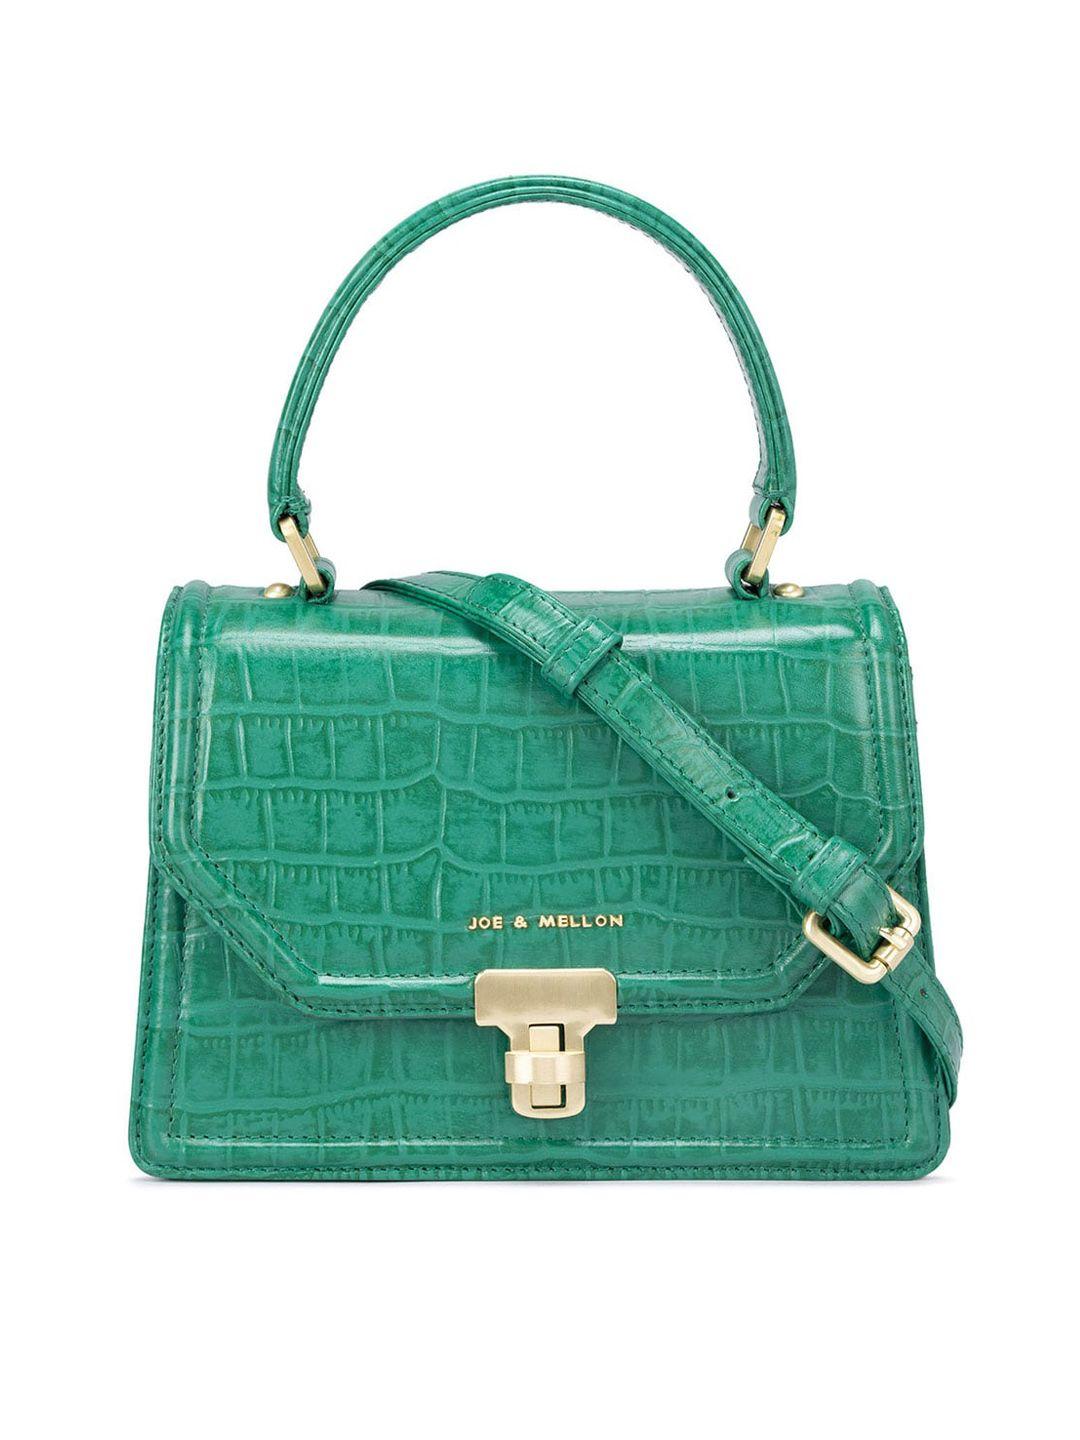 joe & mellon textured leather structured satchel with buckle detail